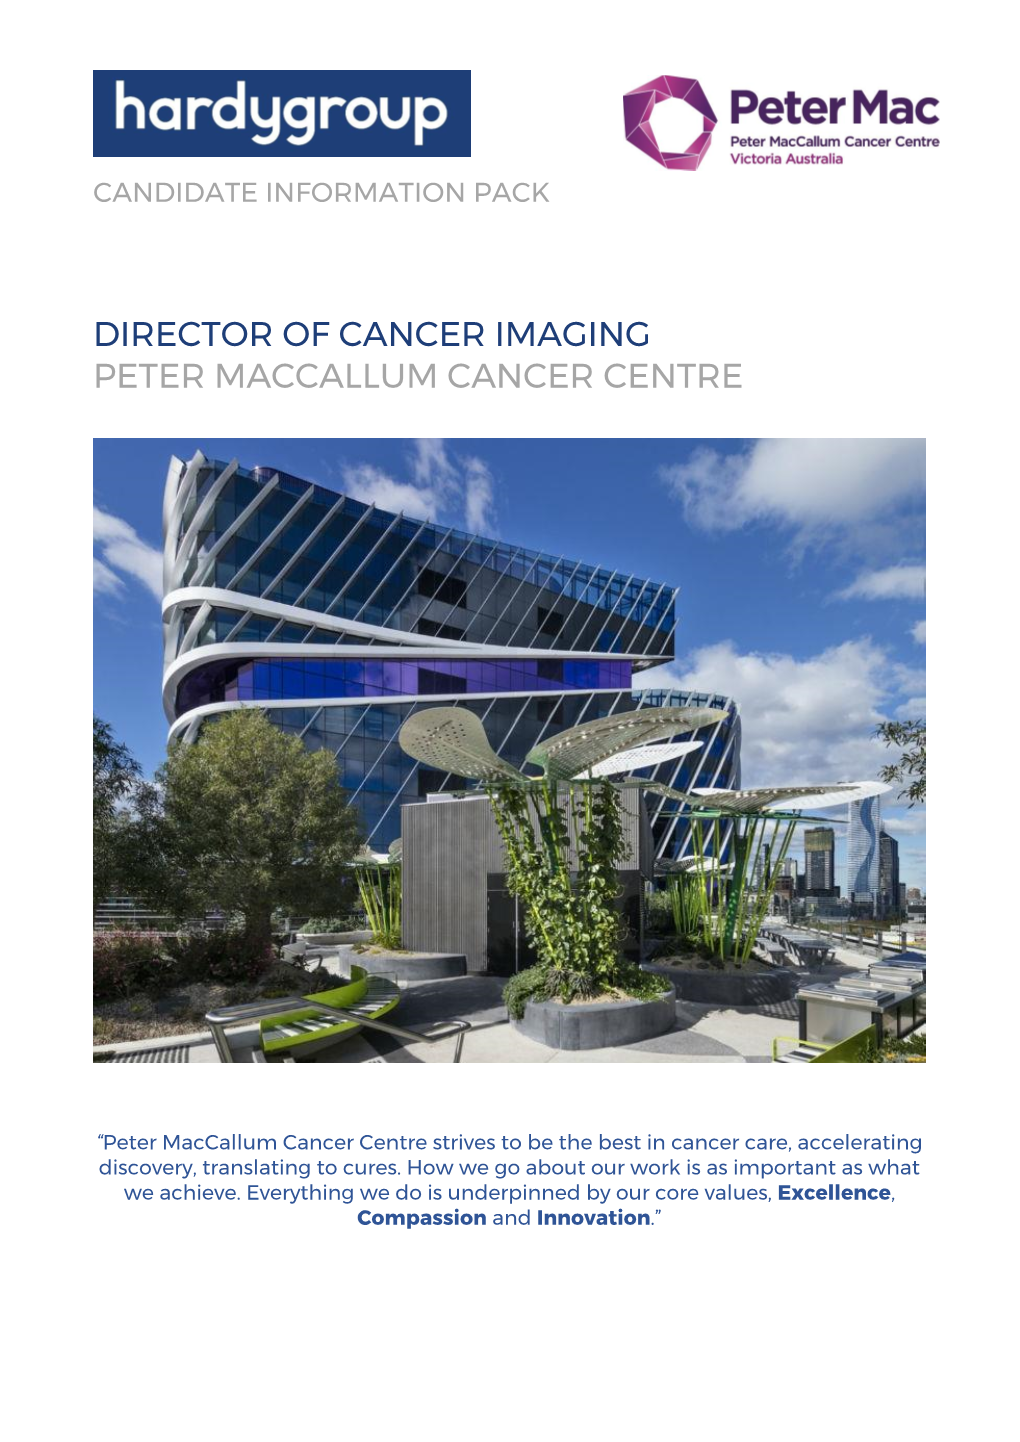 Director of Cancer Imaging Peter Maccallum Cancer Centre